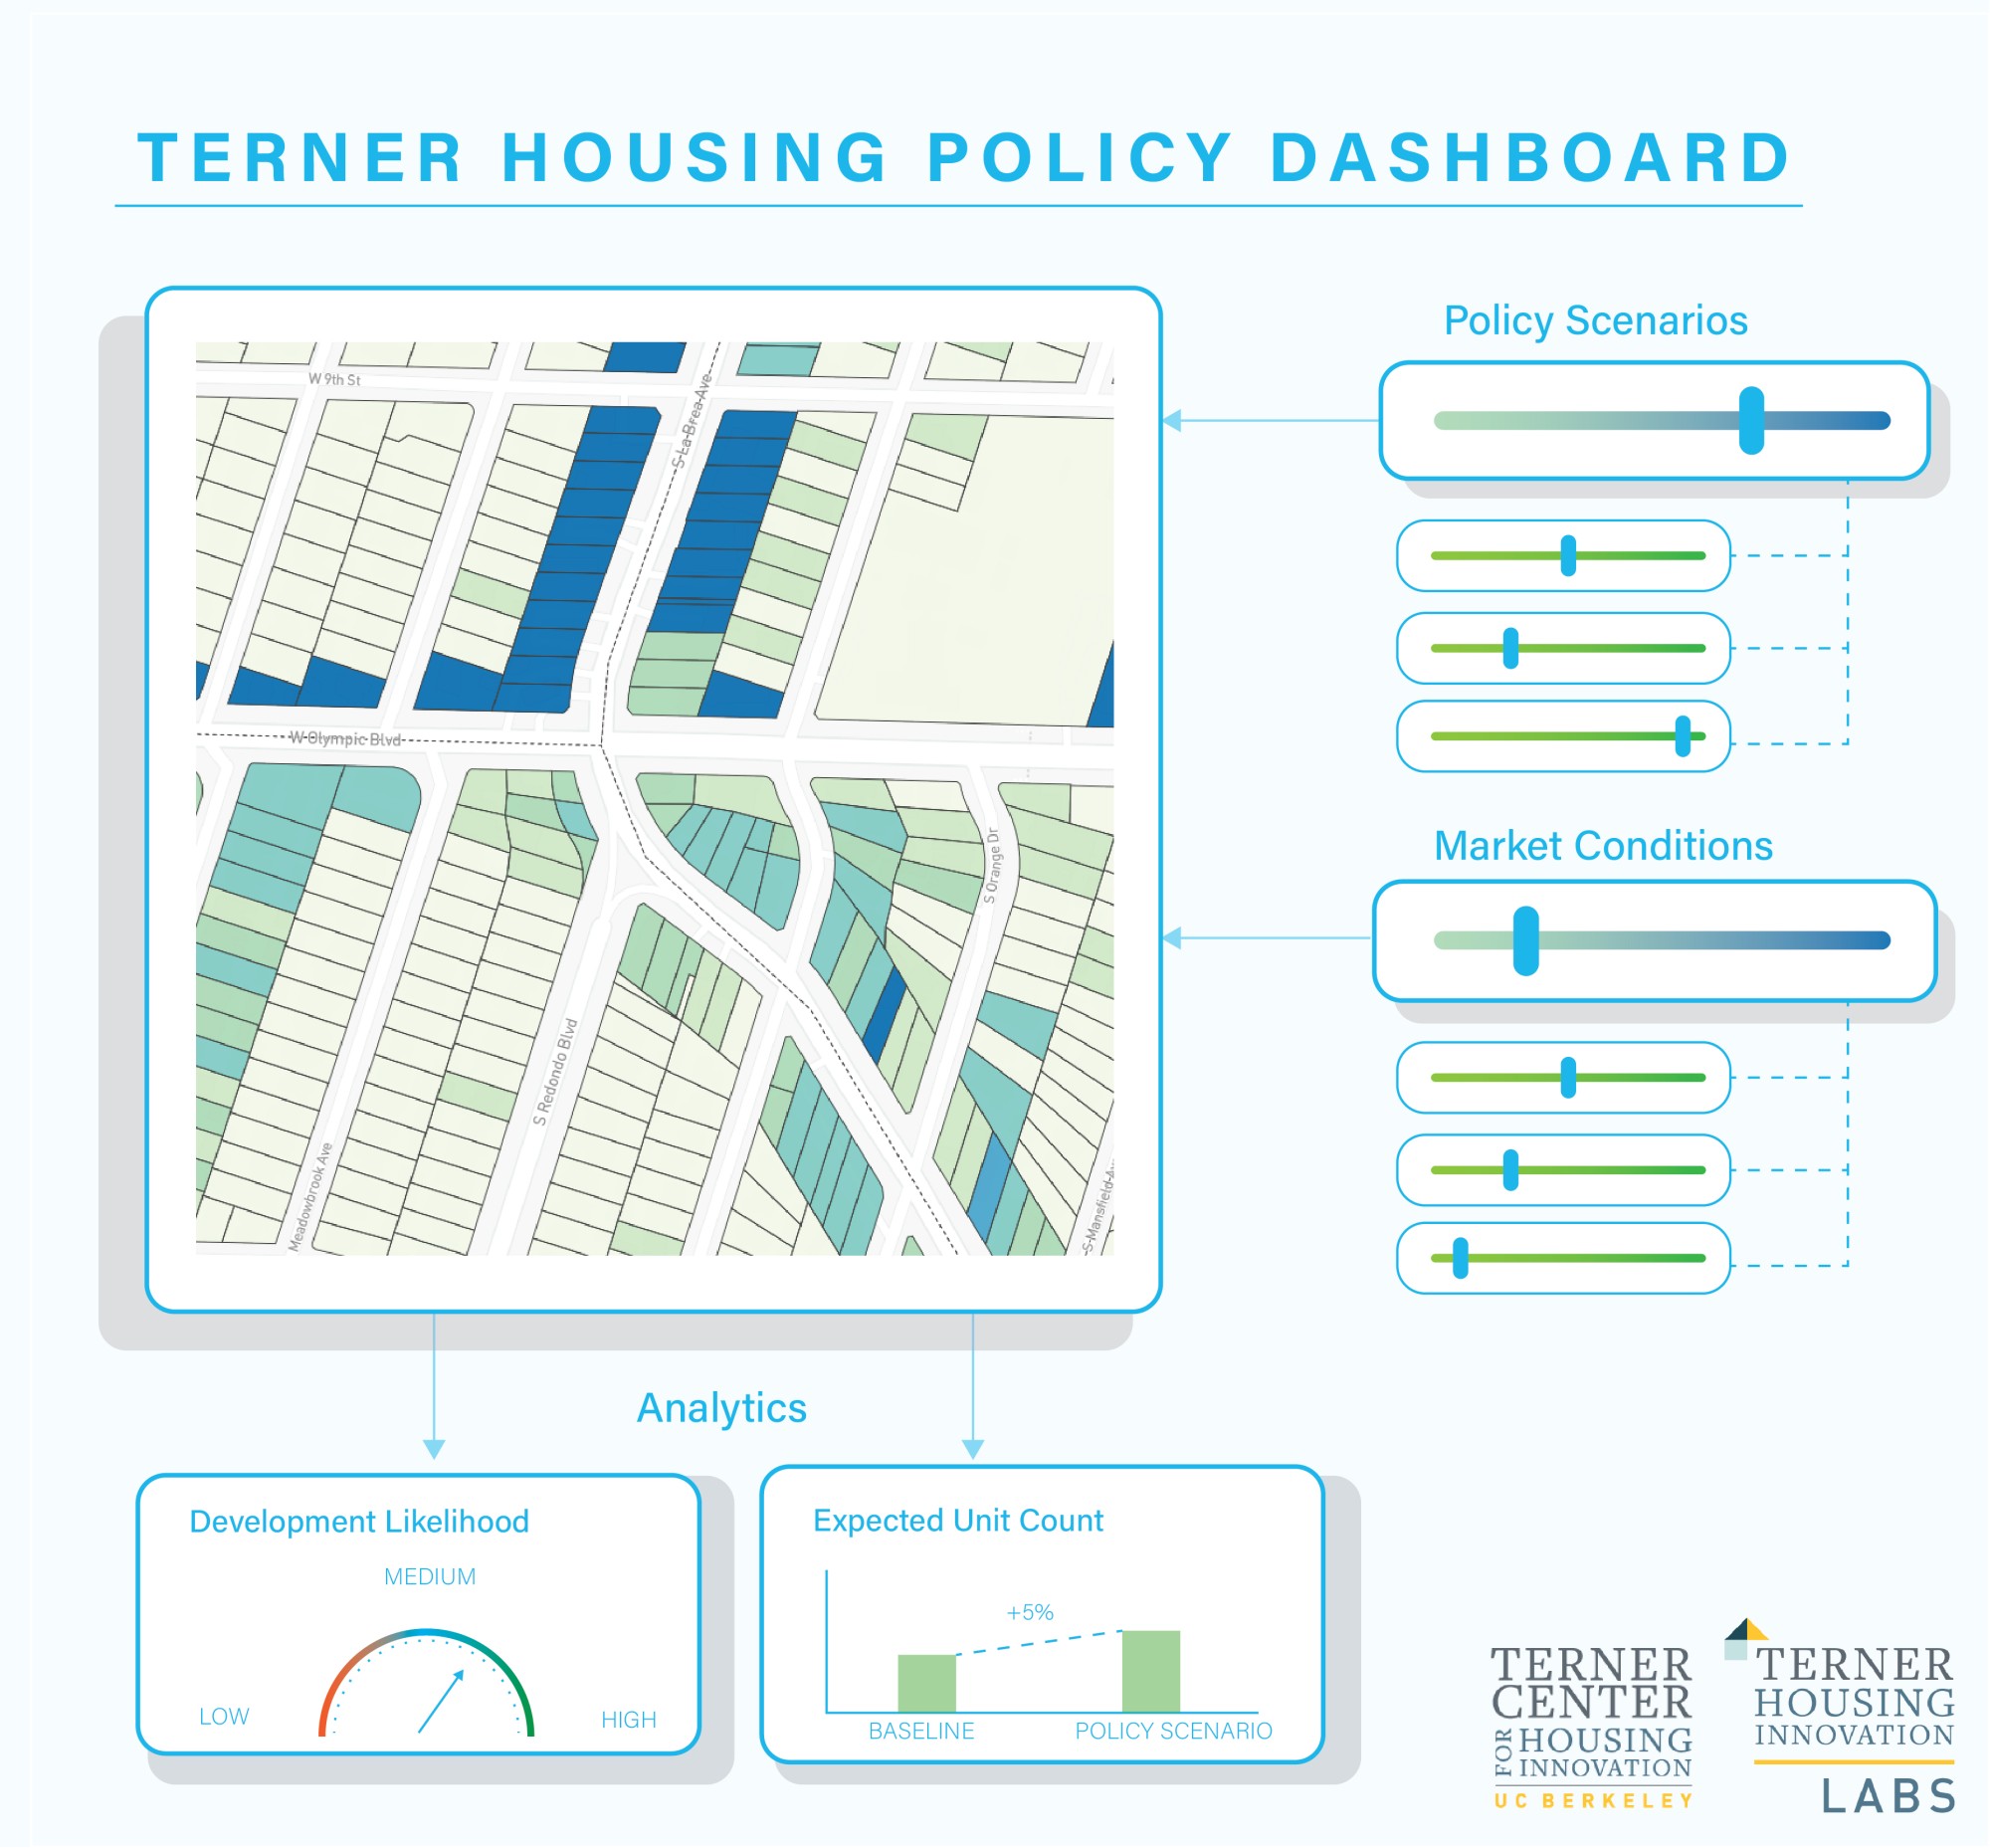 Text: Terner Housing Policy Dashboard; Image of parcel map of Los Angeles and Dashboard components such as sliders to adjust policy scenarios & market conditions and analytics showing increasing unit counts and development likelihood (low medium high); Terner Center and Labs logos